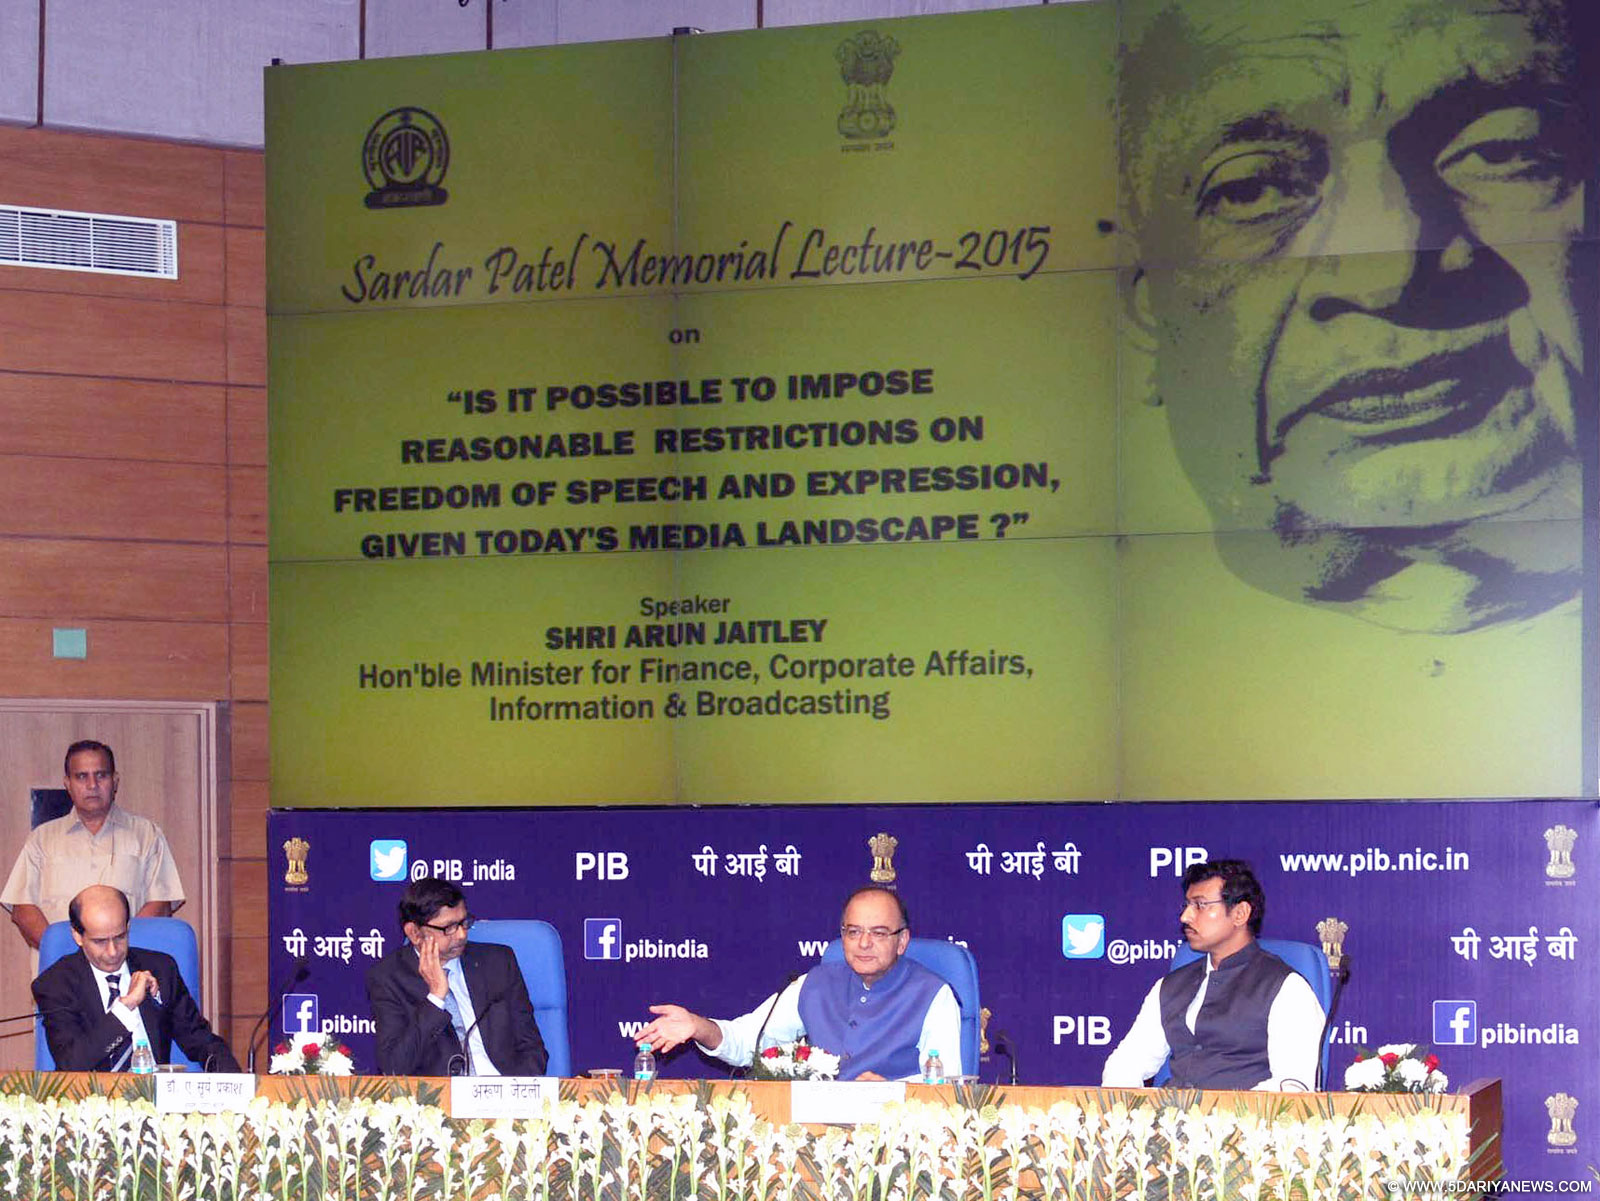 Arun Jaitley delivering the “Sardar Patel Memorial Lecture - 2015”, organised by the All India Radio, in New Delhi on October 26, 2015. The Minister of State for Information & Broadcasting, Col. Rajyavardhan Singh Rathore and the Chairman, Prasar Bharati, Dr. A Surya Prakash are also seen.